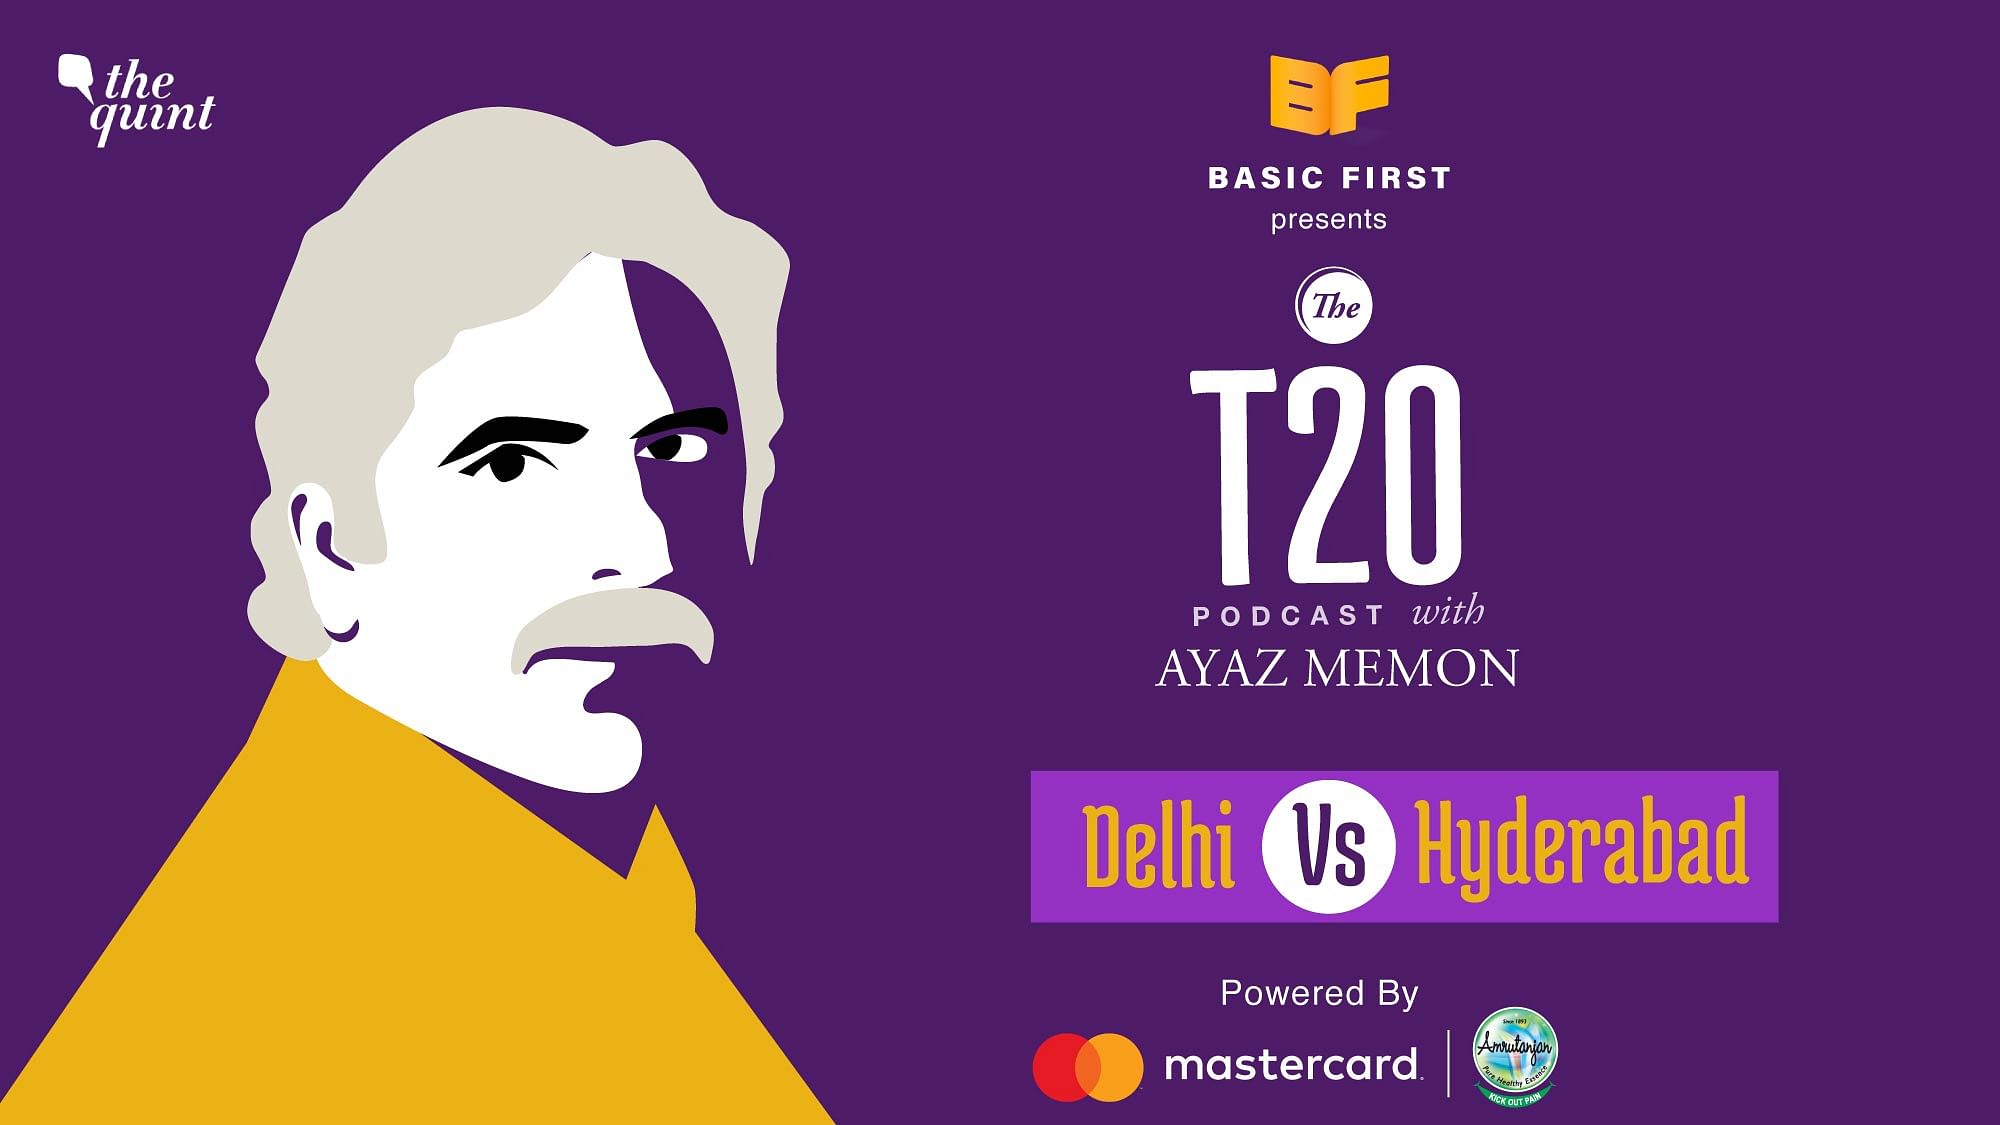 On episode 11 of The T20 Podcast, Ajaz Memon and I talk about Hyderabad’s 15-run victory over Delhi.